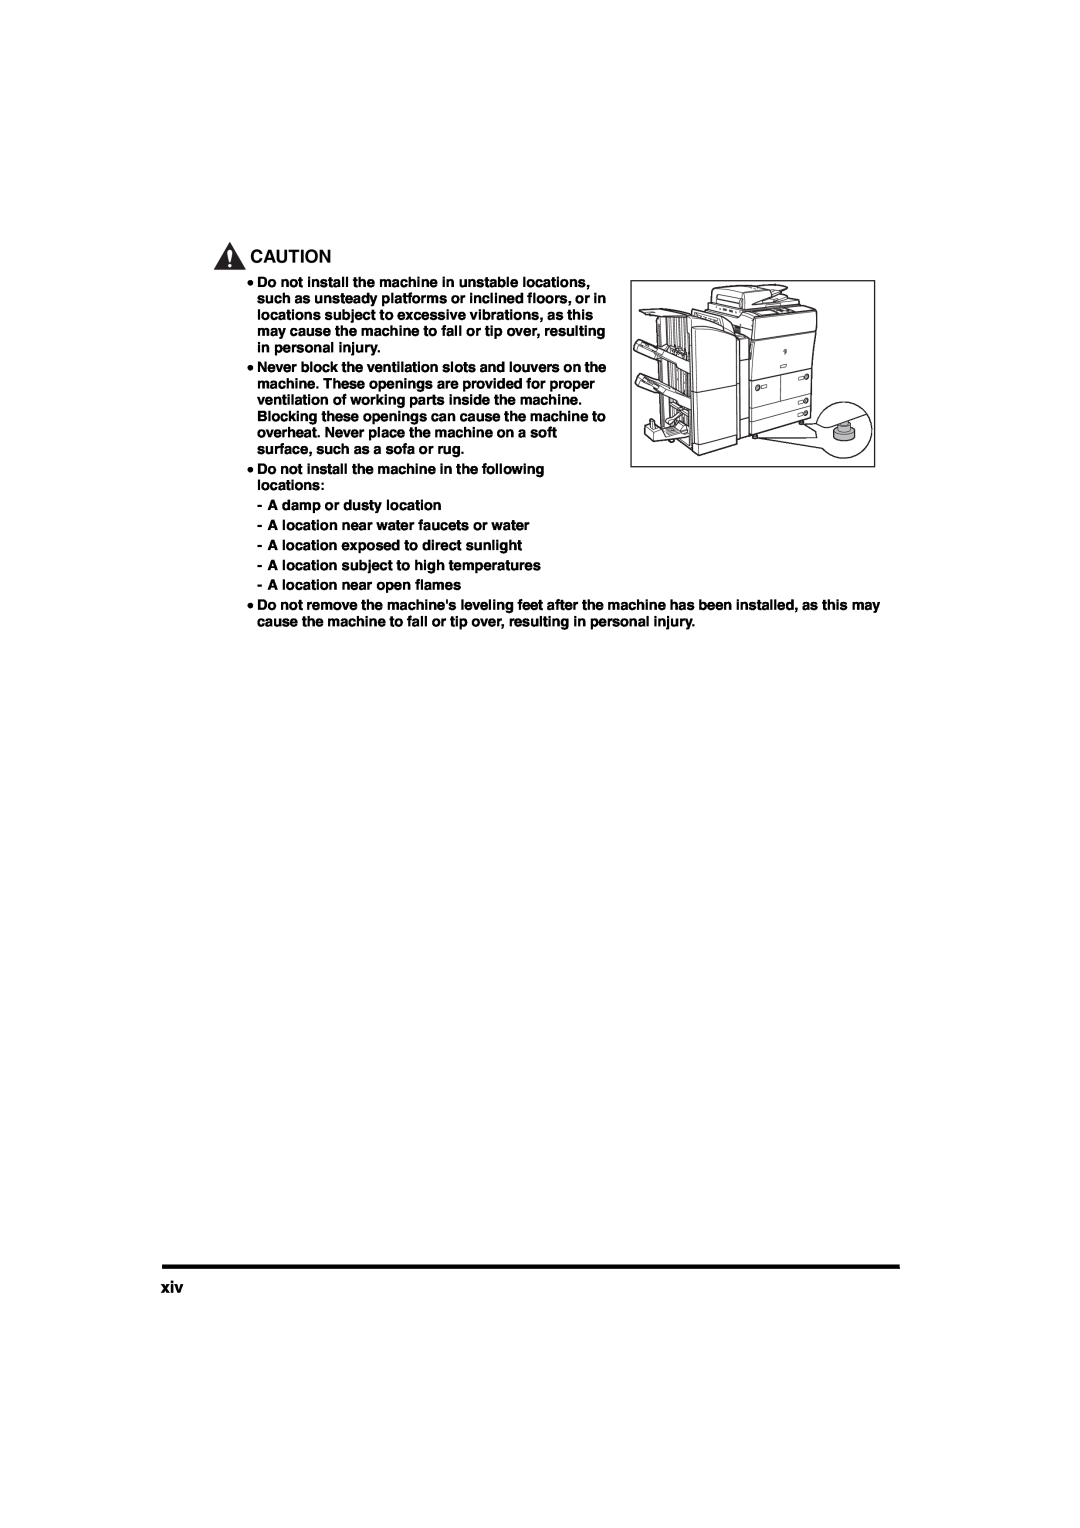 Canon iR6570 manual Do not install the machine in unstable locations 